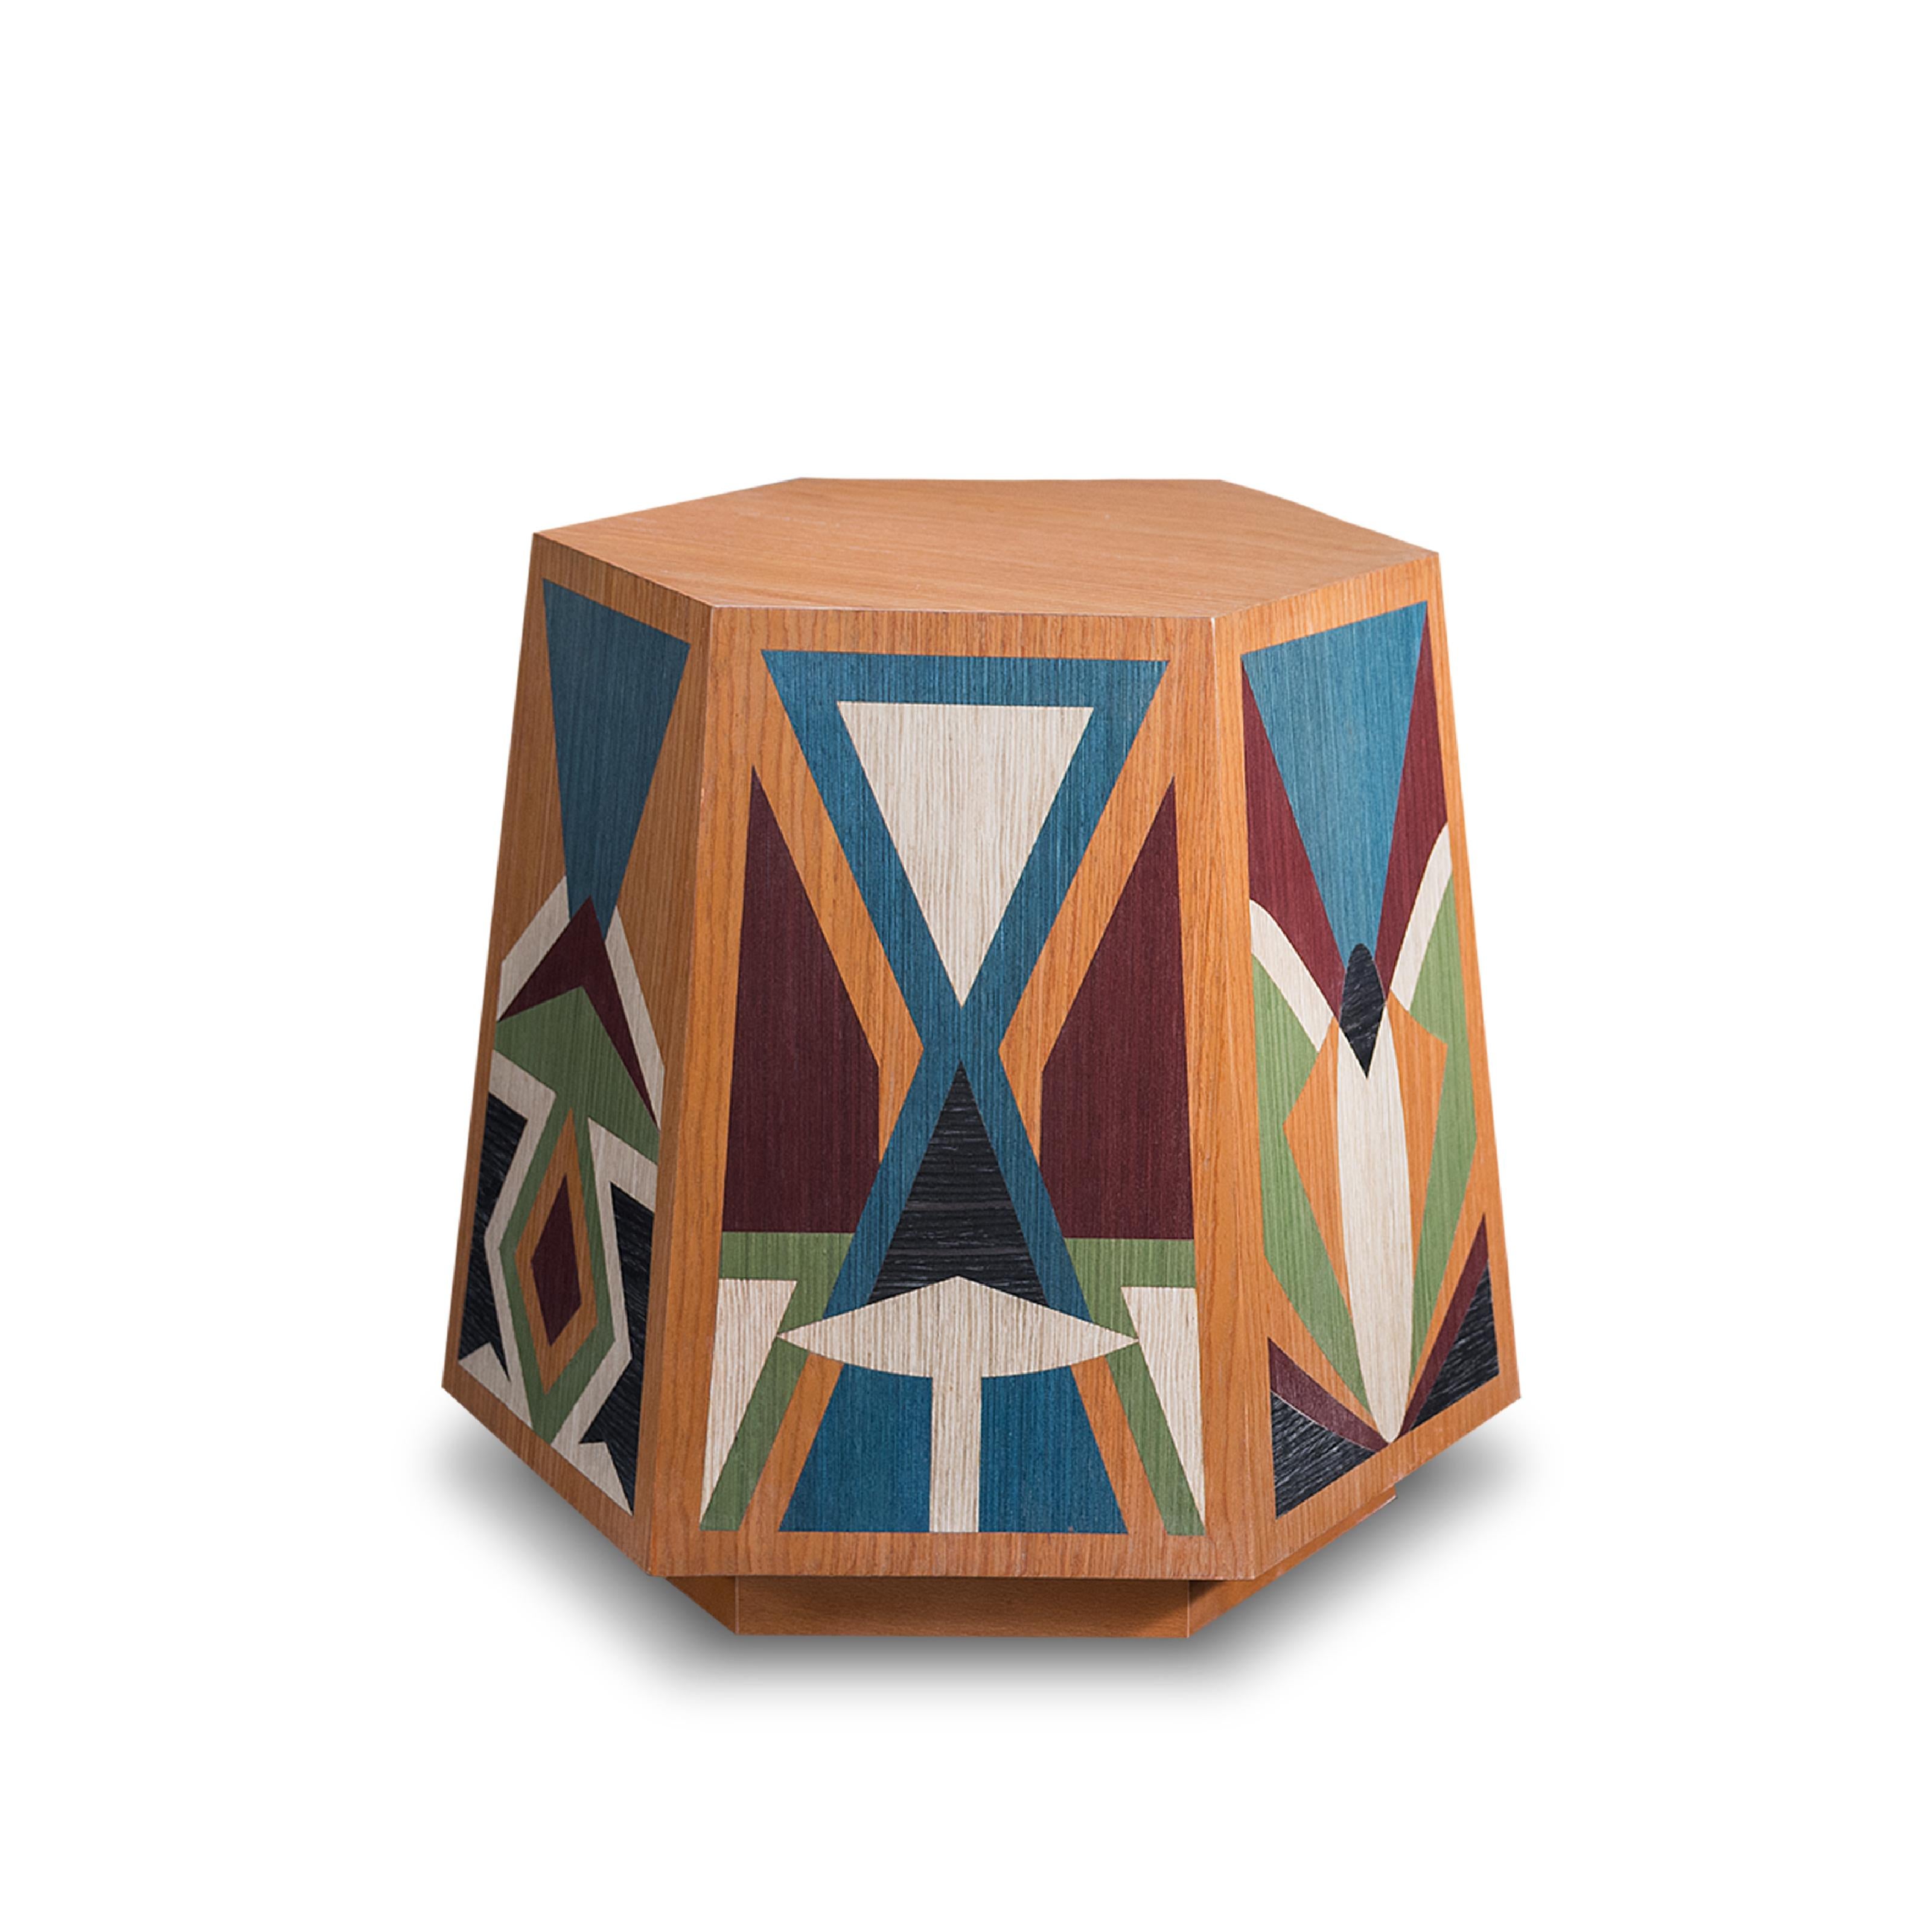 The hexagonal stool draws inspiration from Karim Ataya's intricate Islamic patterns, embodying geometric elegance and spiritual symbolism. Meticulously crafted patterns adorn each side, creating a harmonious balance and reﬂecting the principles of